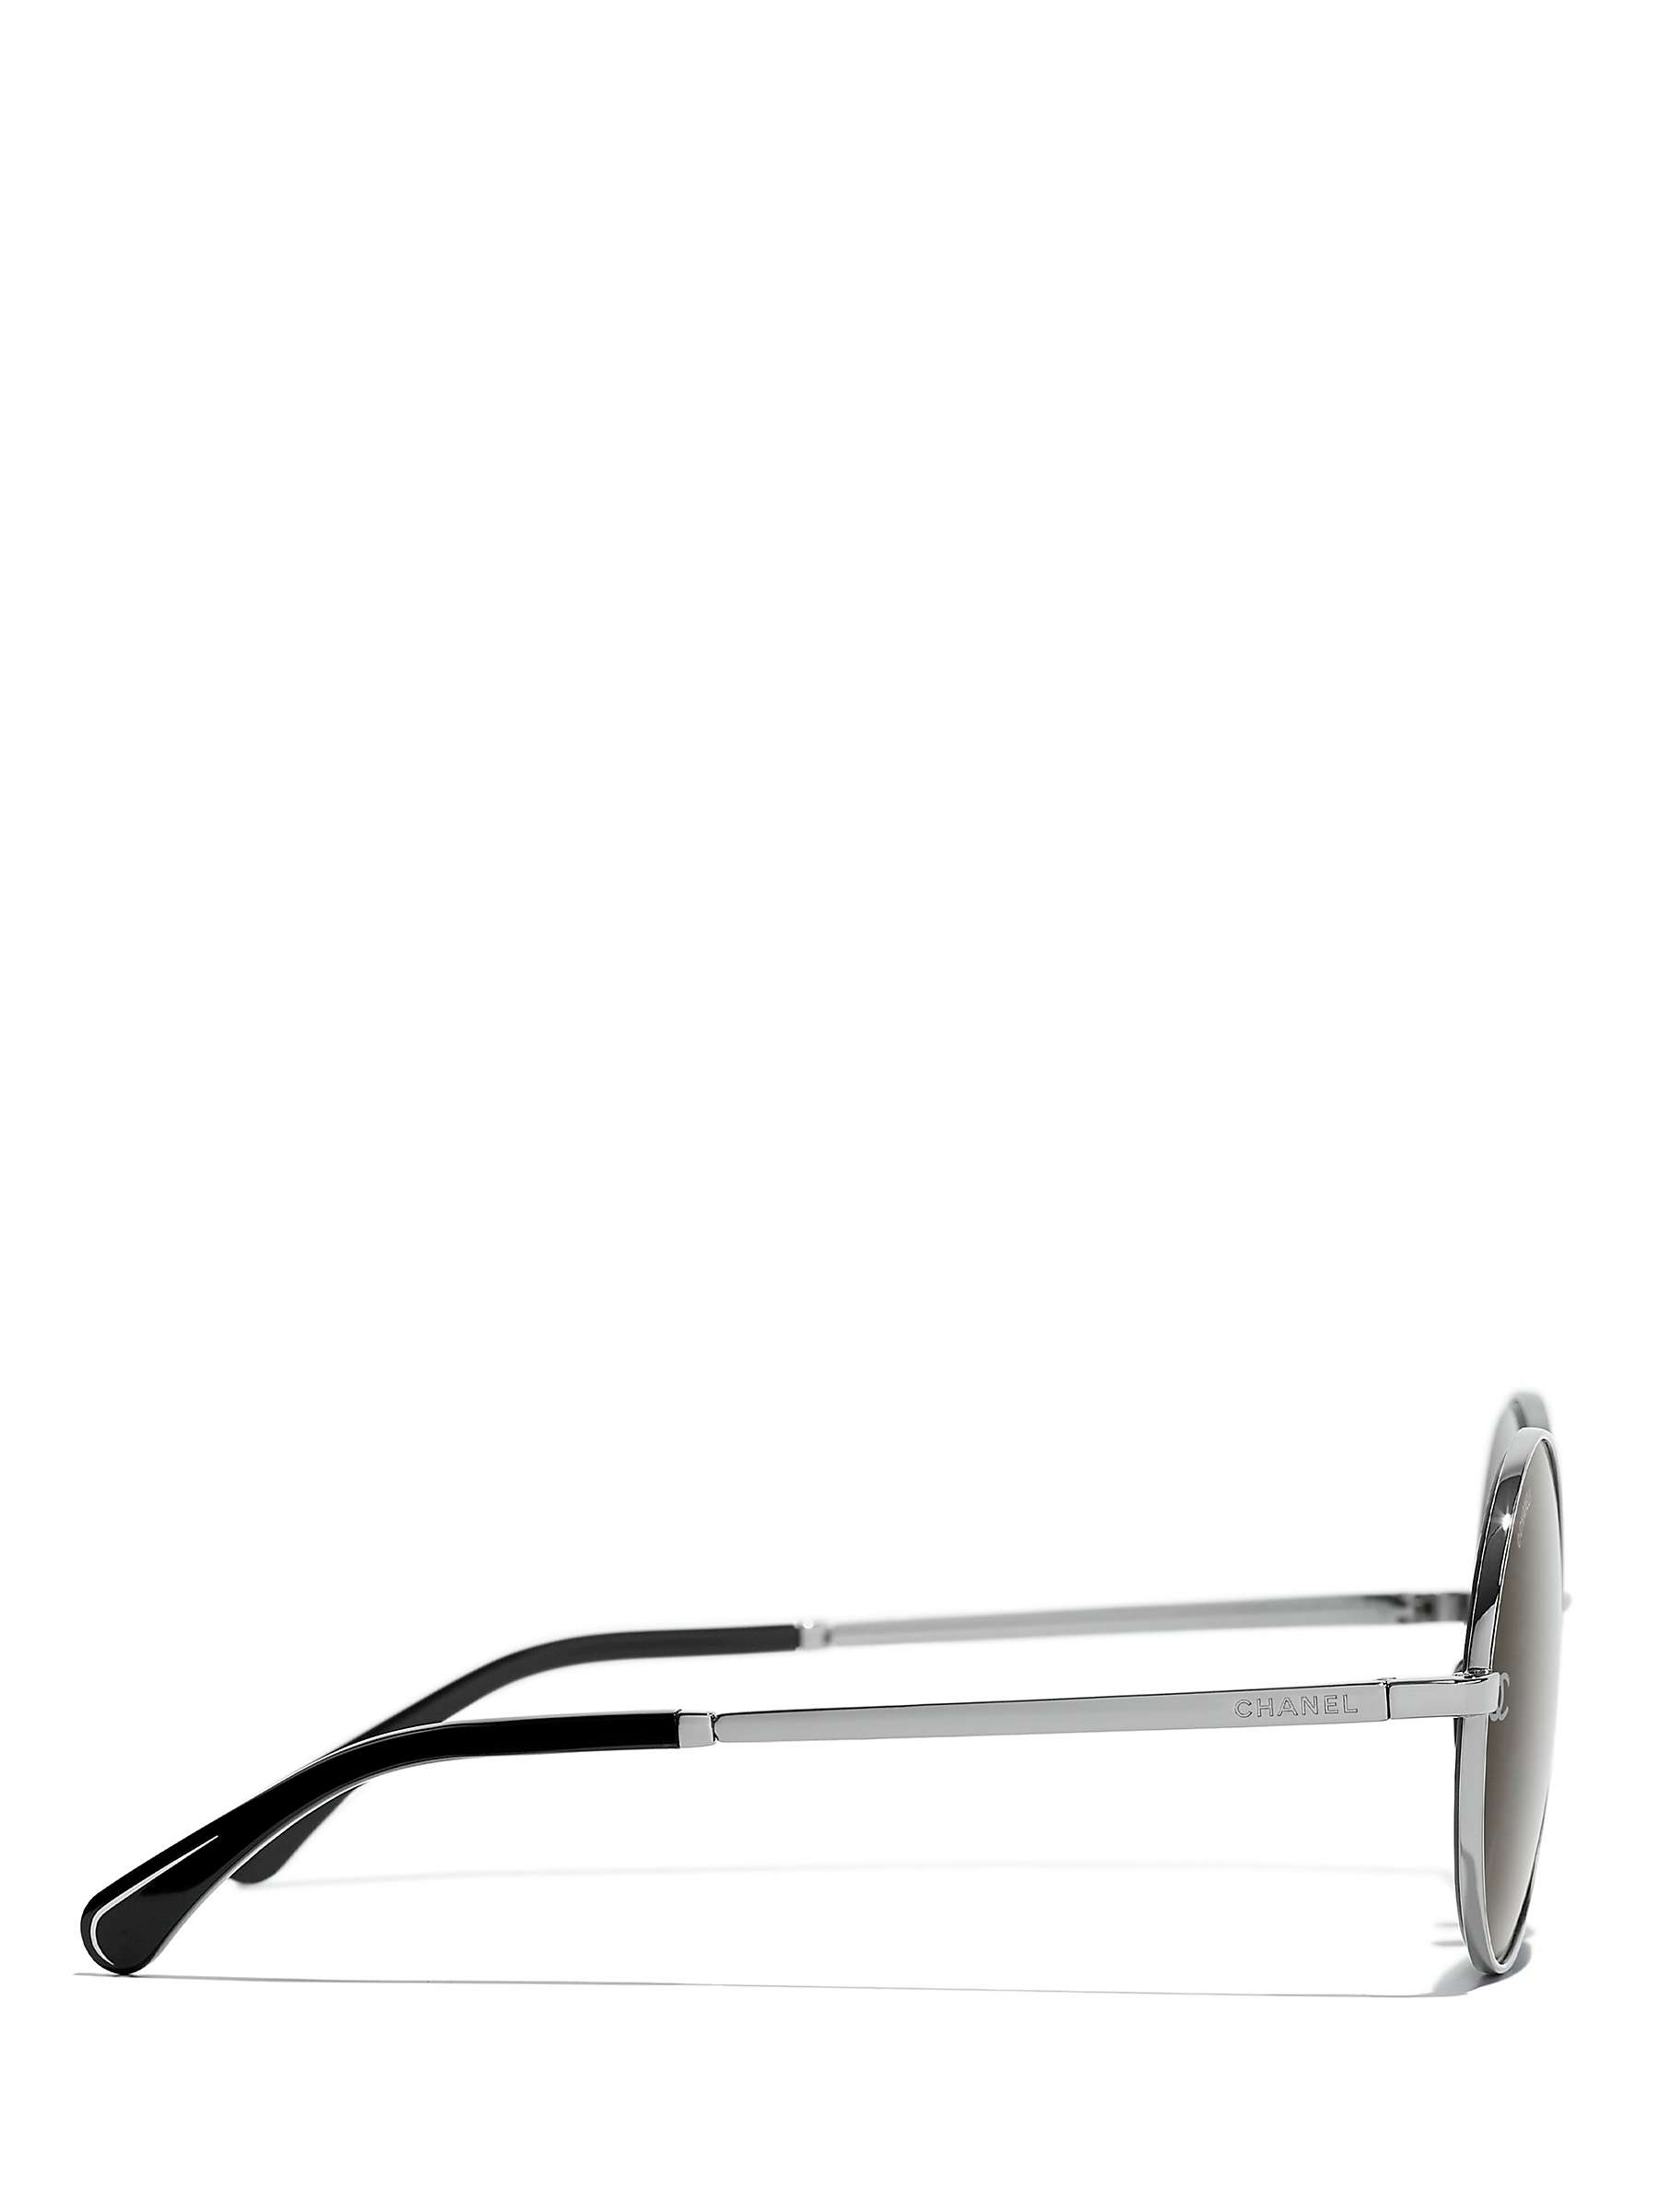 Buy CHANEL Round Sunglasses CH4268 Shiny Gunmetal/Brown Online at johnlewis.com